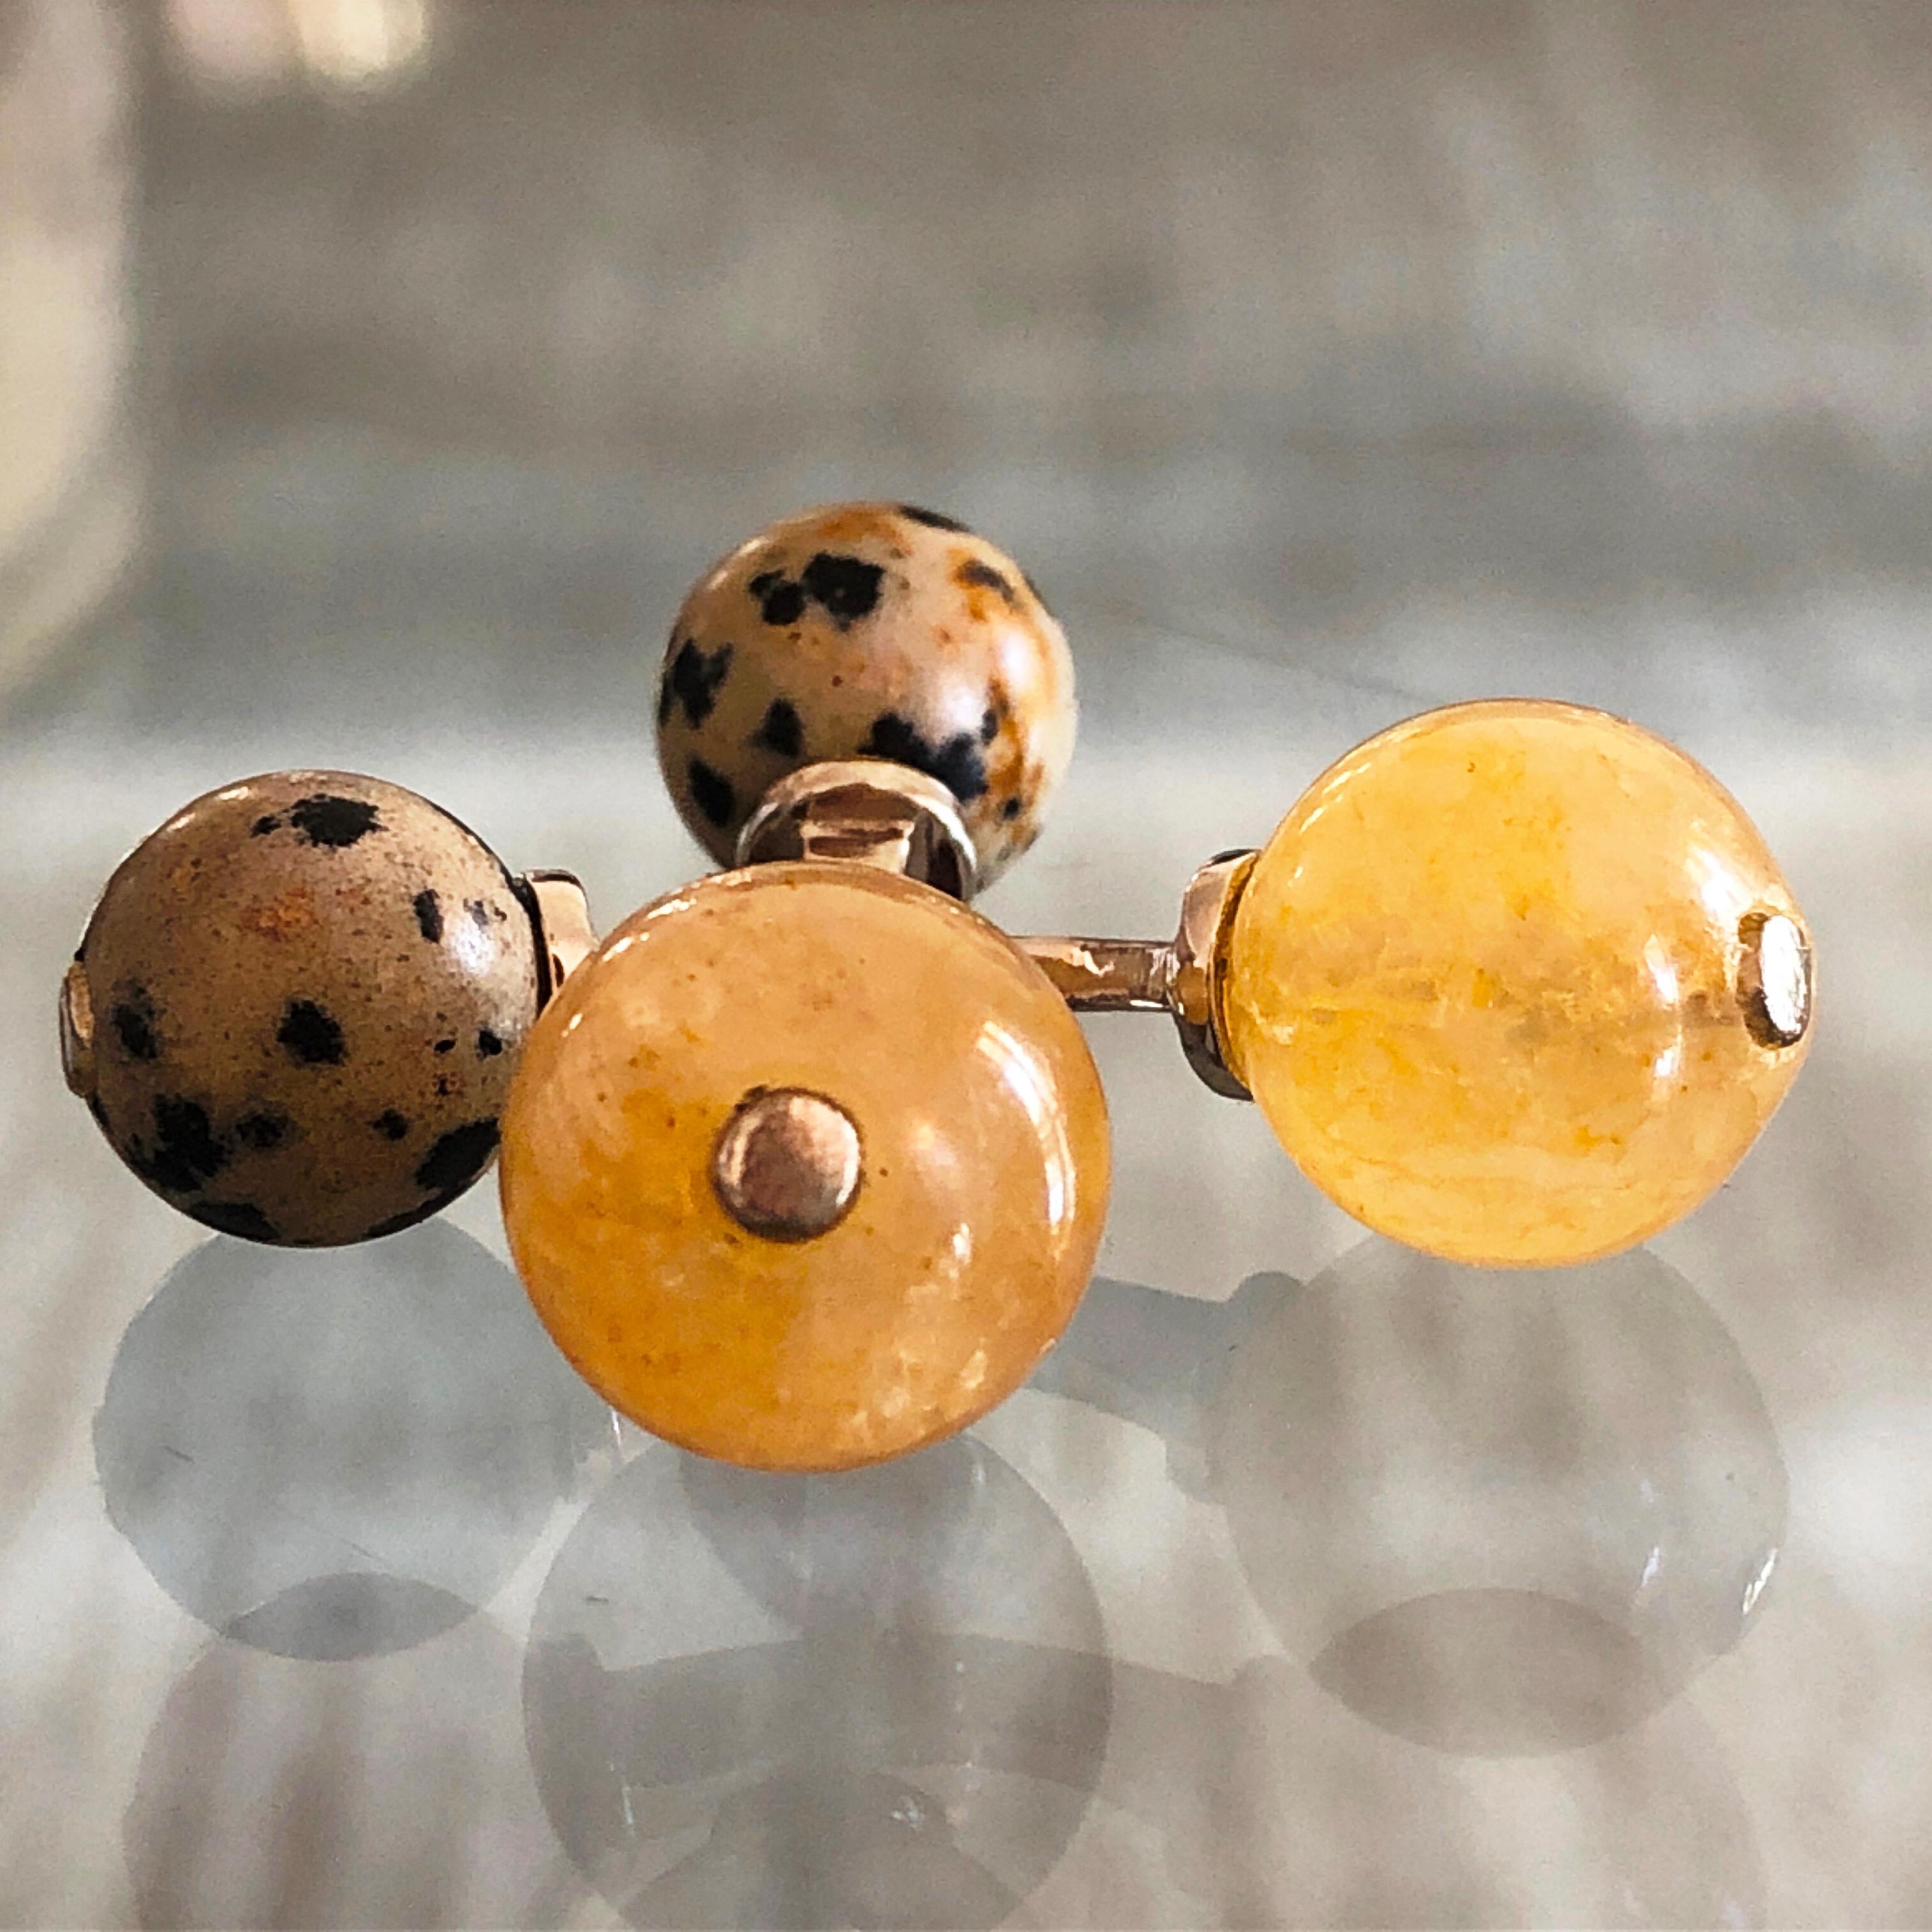 Unique, Chic, Hand Inlaid Natural Light Yellow Agate Dalmatian Jasper Little Ball Sterling Silver Cufflinks.

In our Smart Black Box and Pouch.
